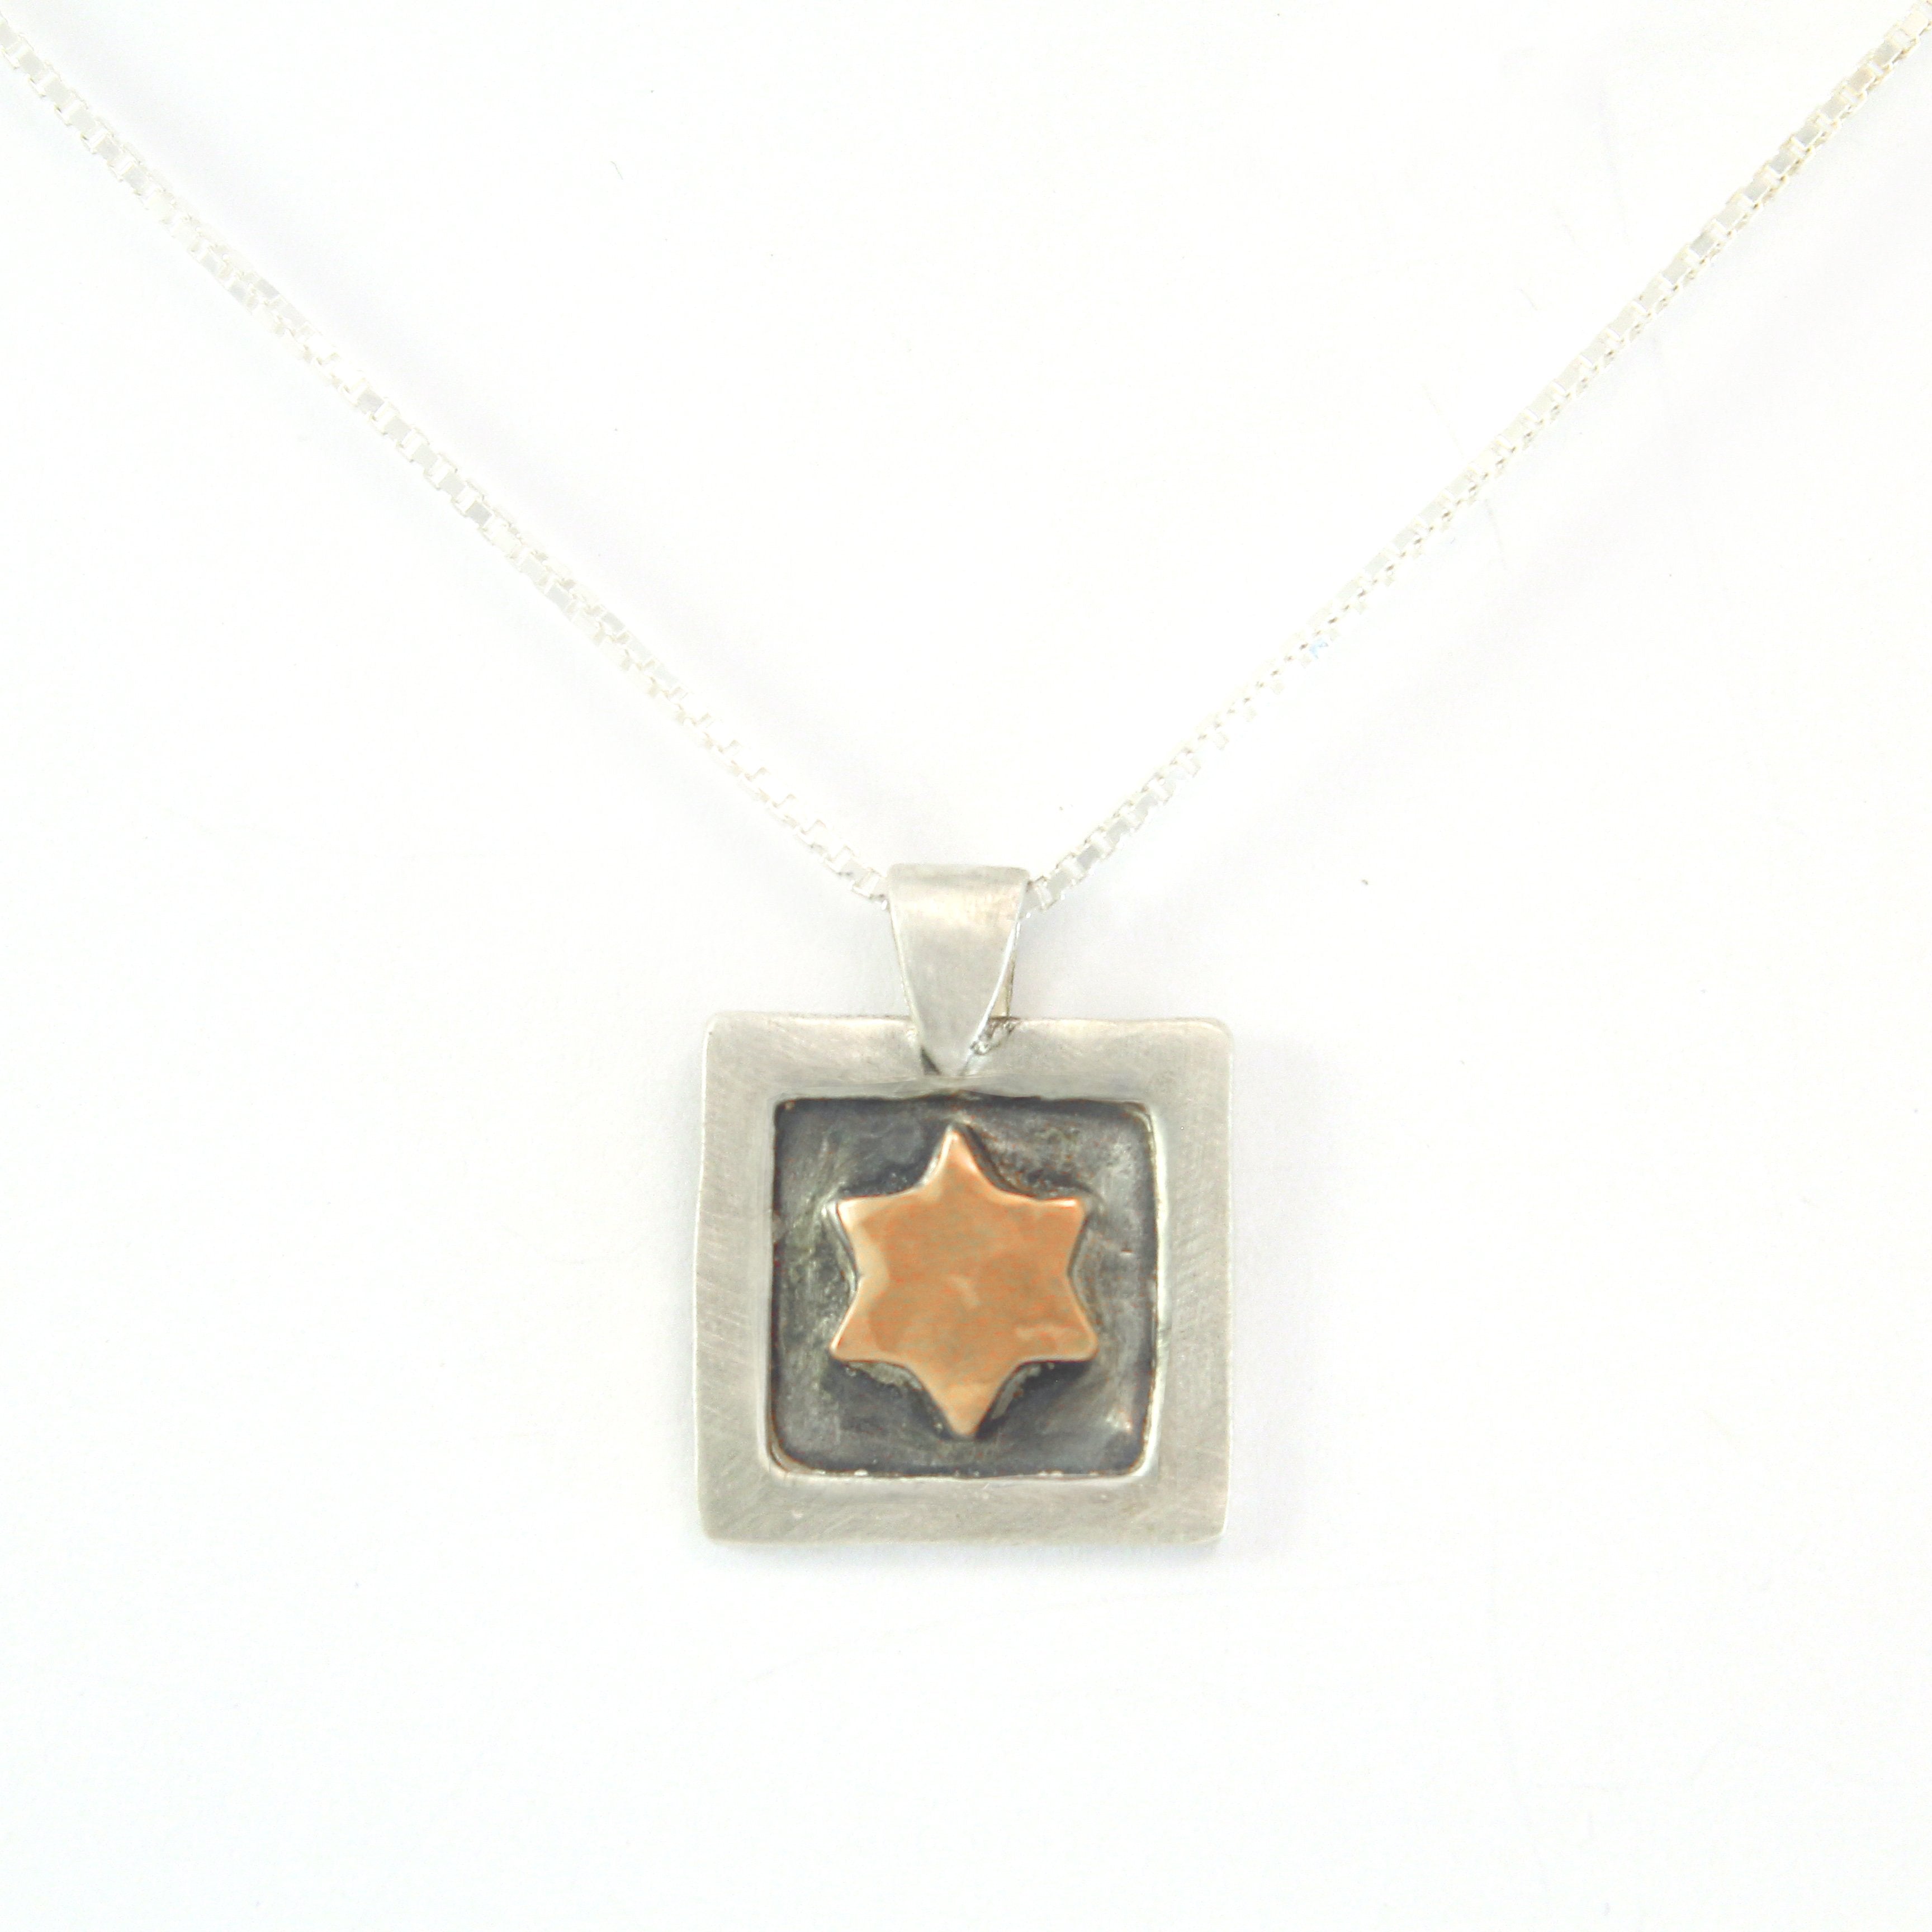 Star of David - Silver & Red Gold Necklace - Shulamit Kanter Official Store